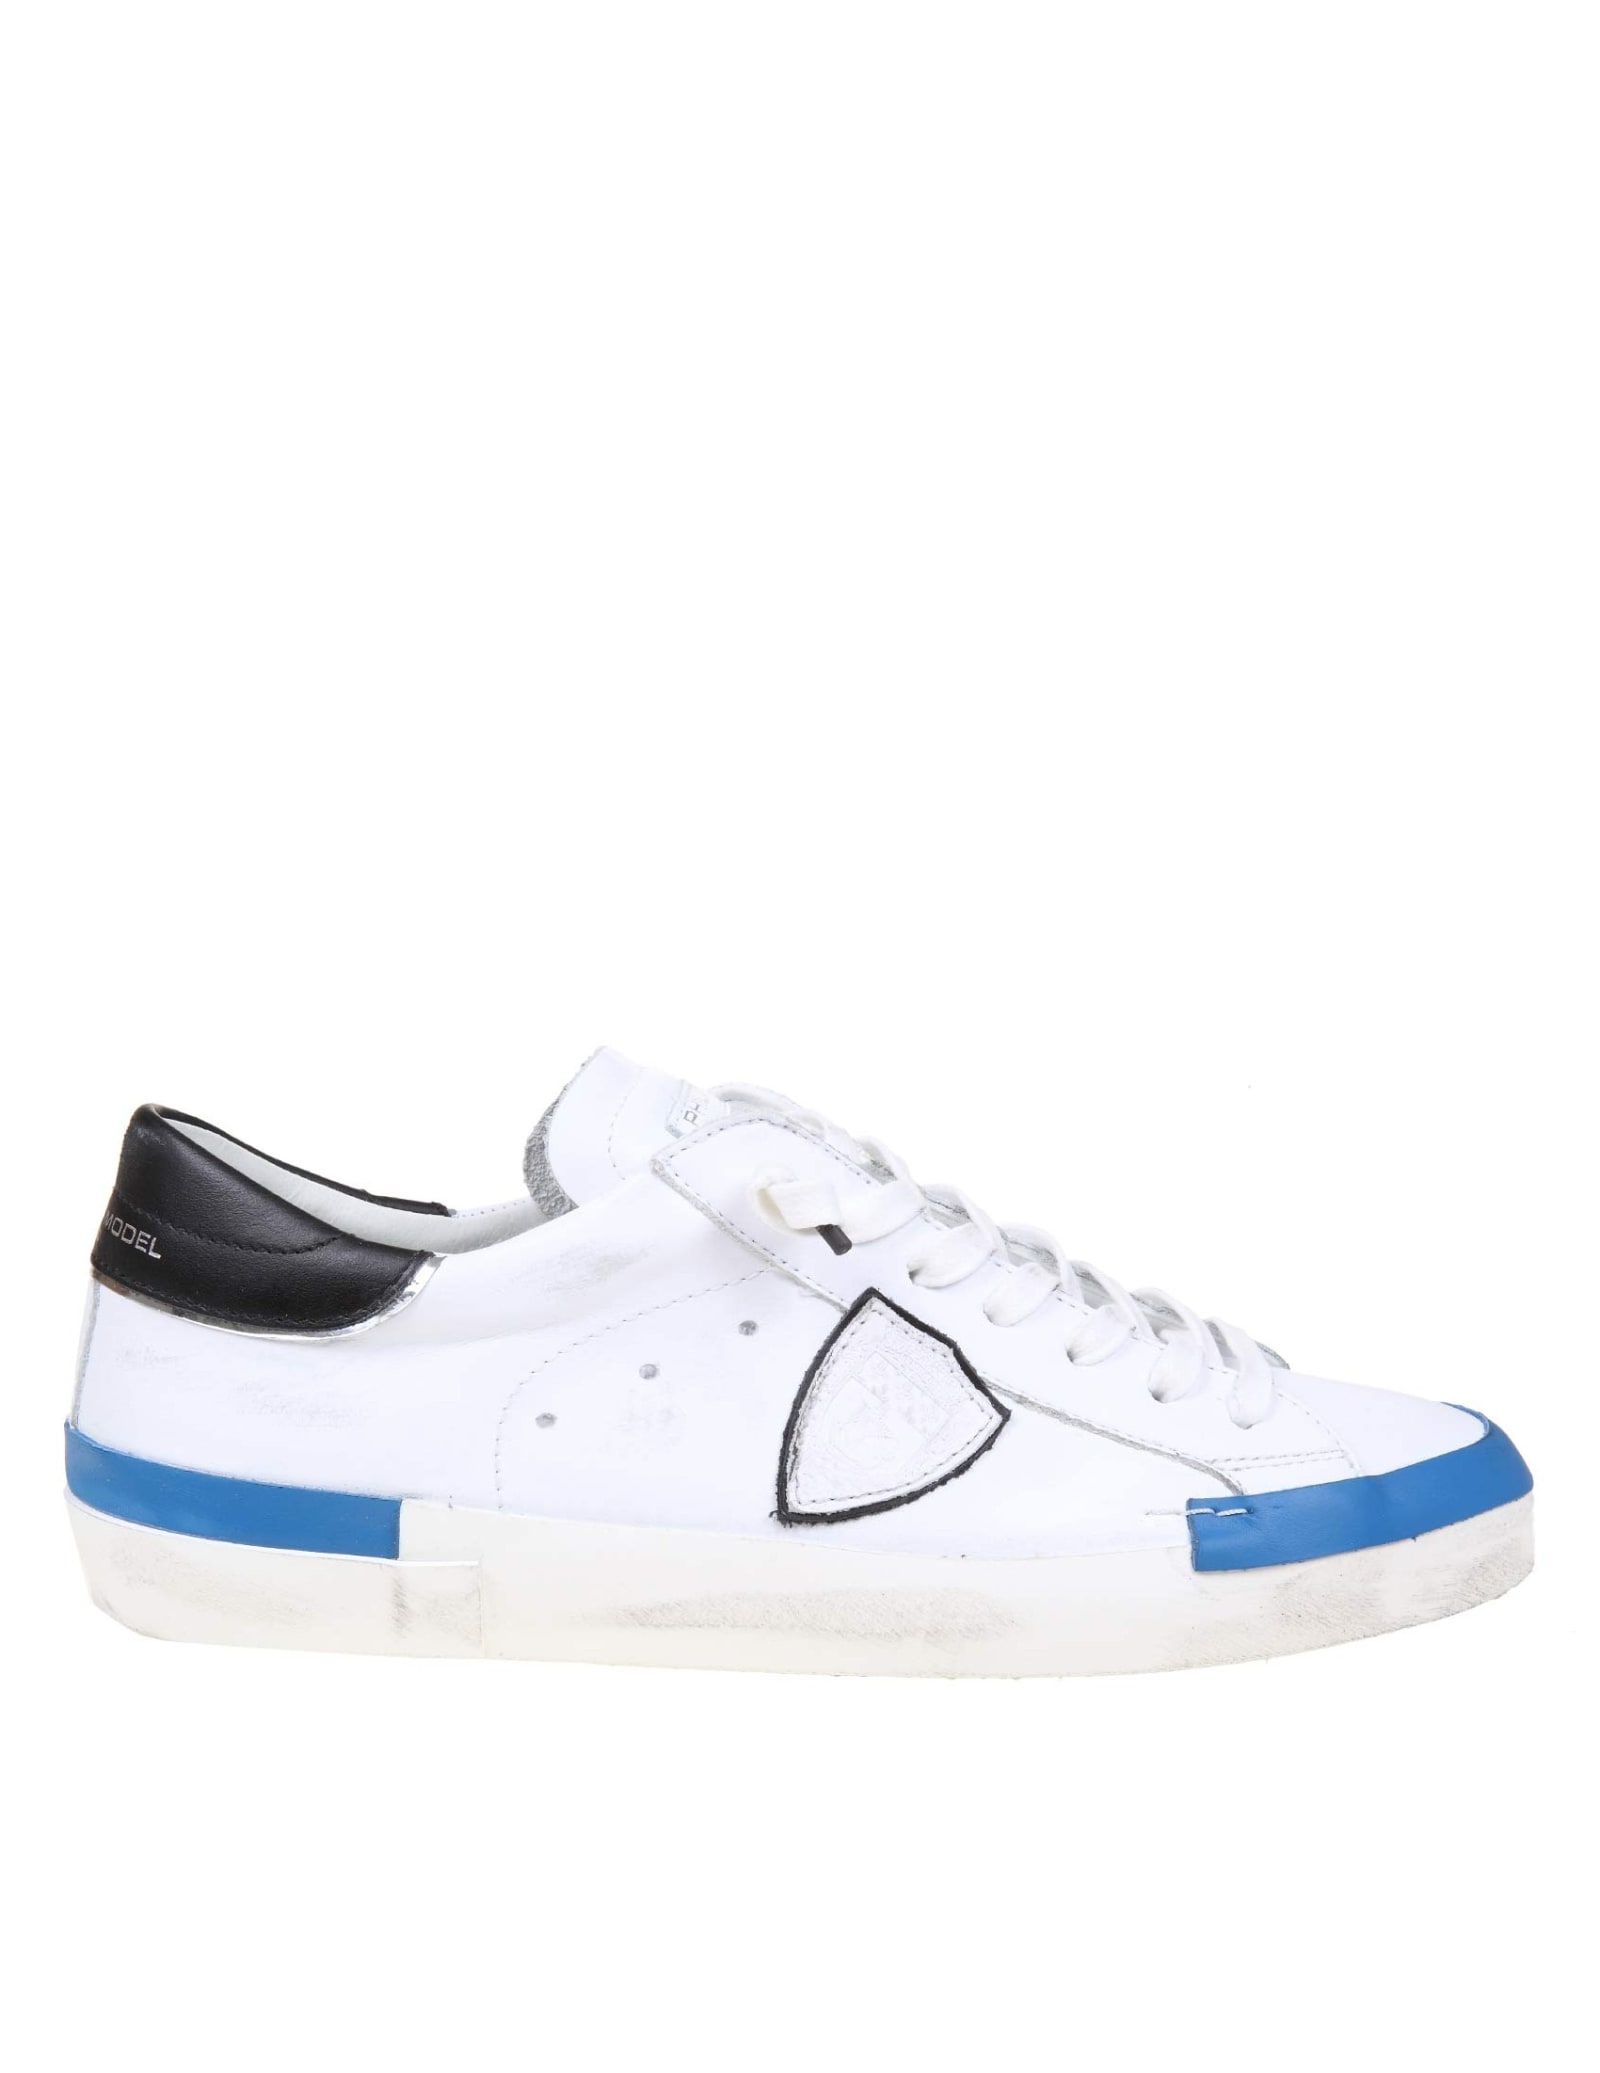 Philippe Model Prsx Sneakers In White And Blue Leather